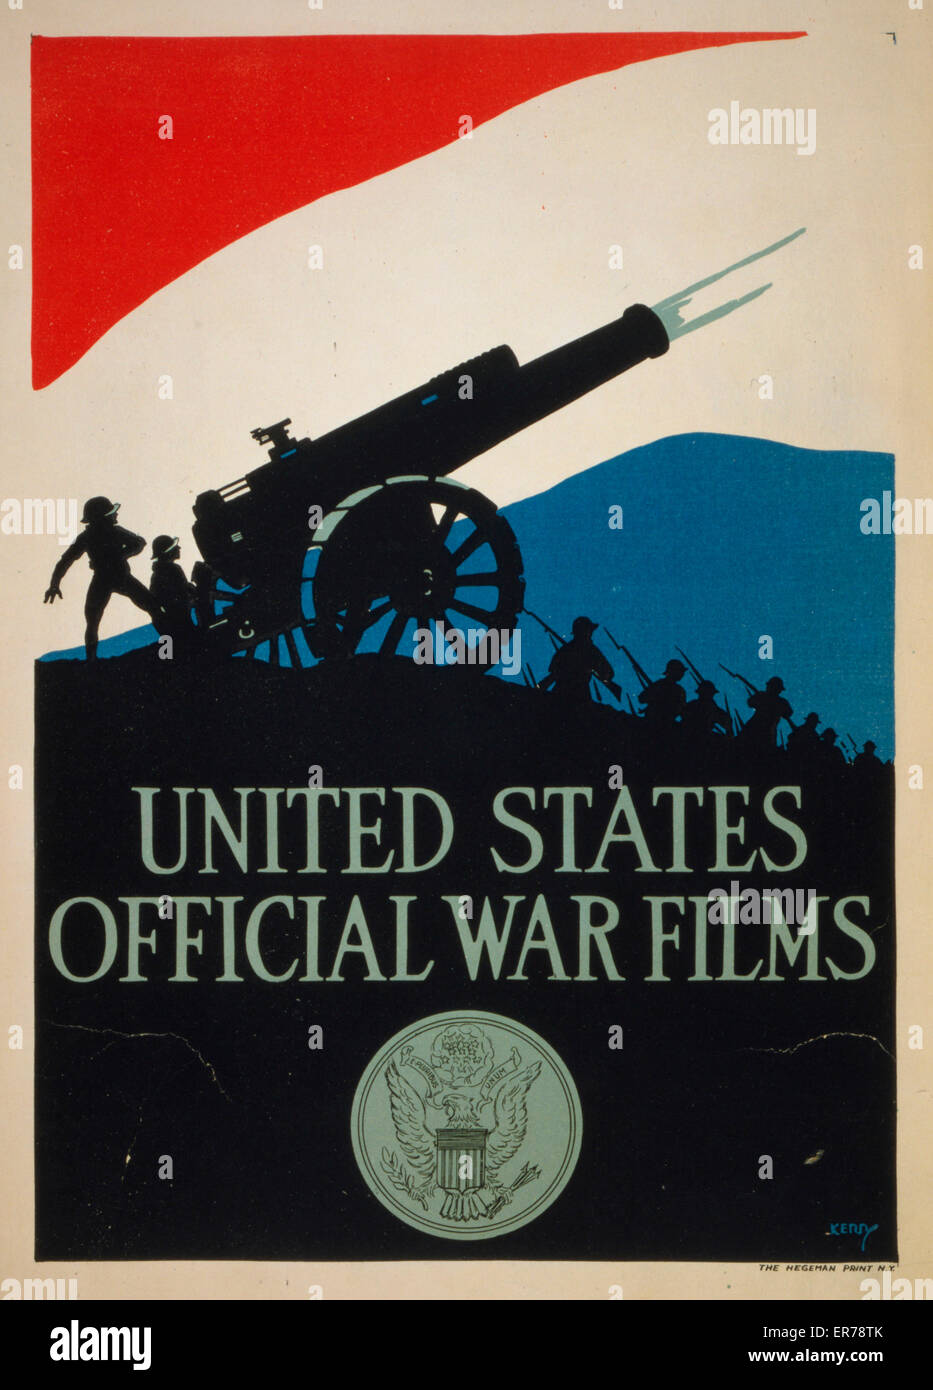 United States official war films Stock Photo